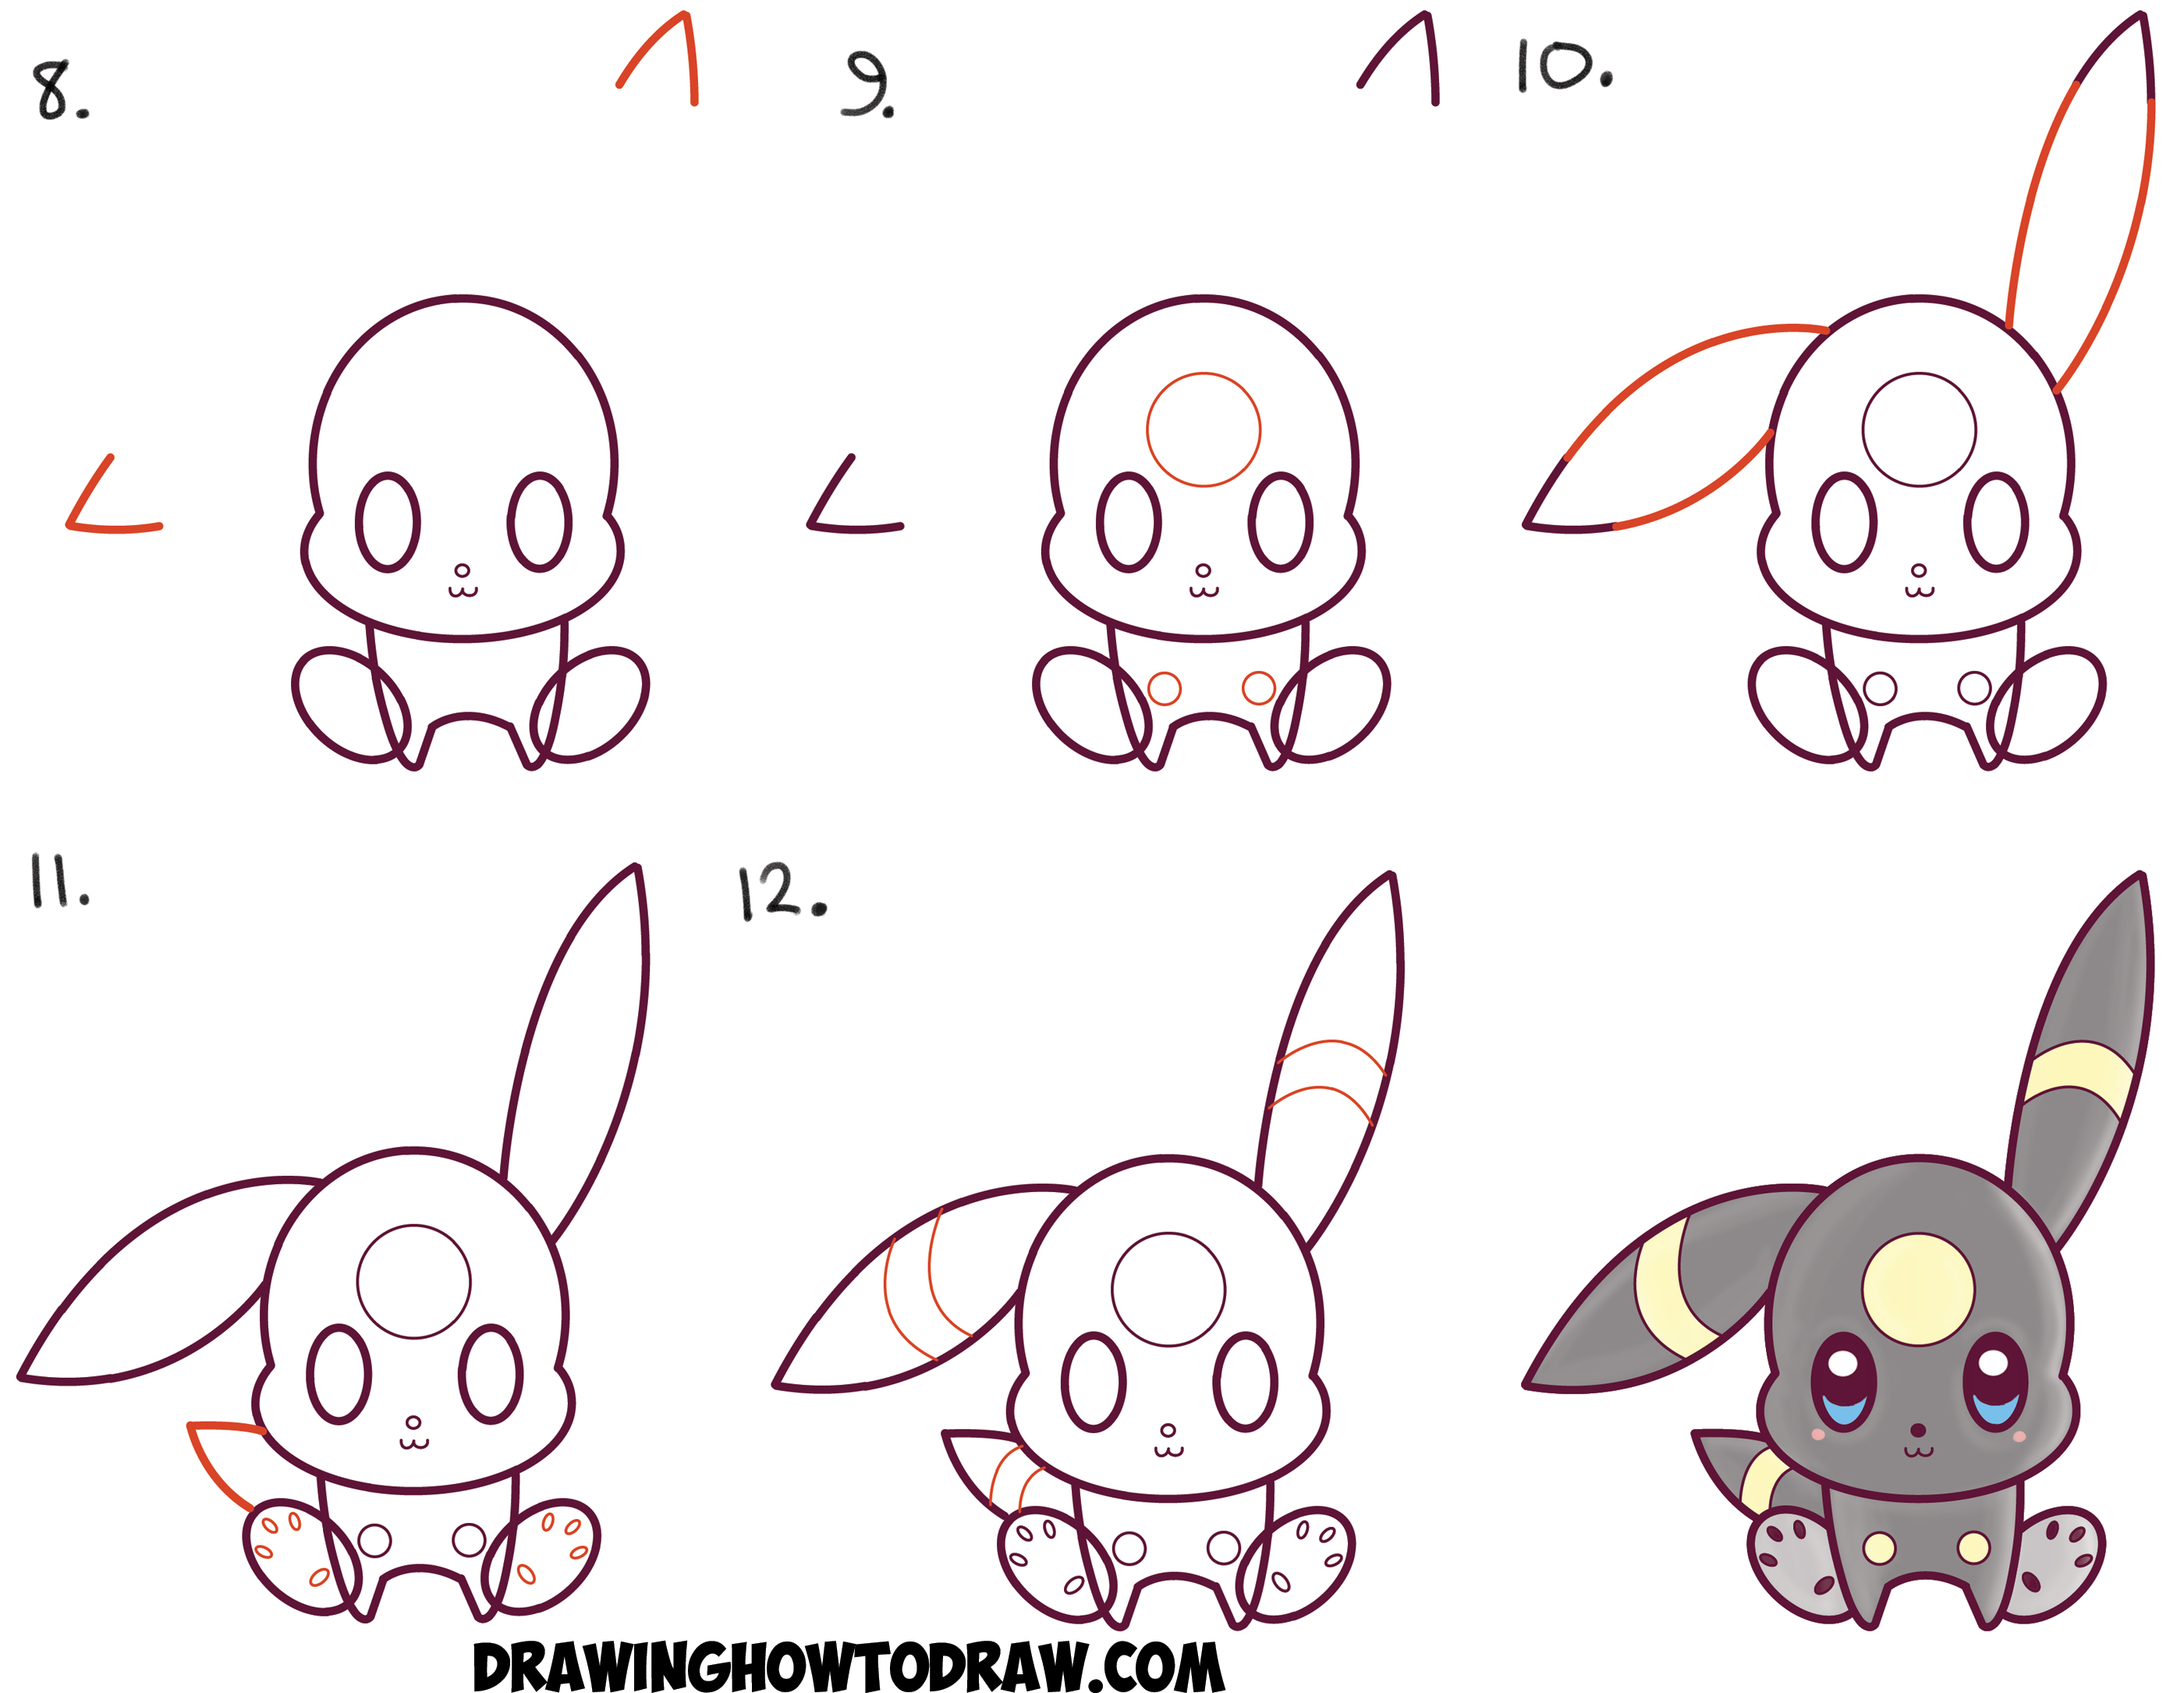 How to Draw Cute Kawaii Chibi Umbreon from Pokemon Easy Step by Step